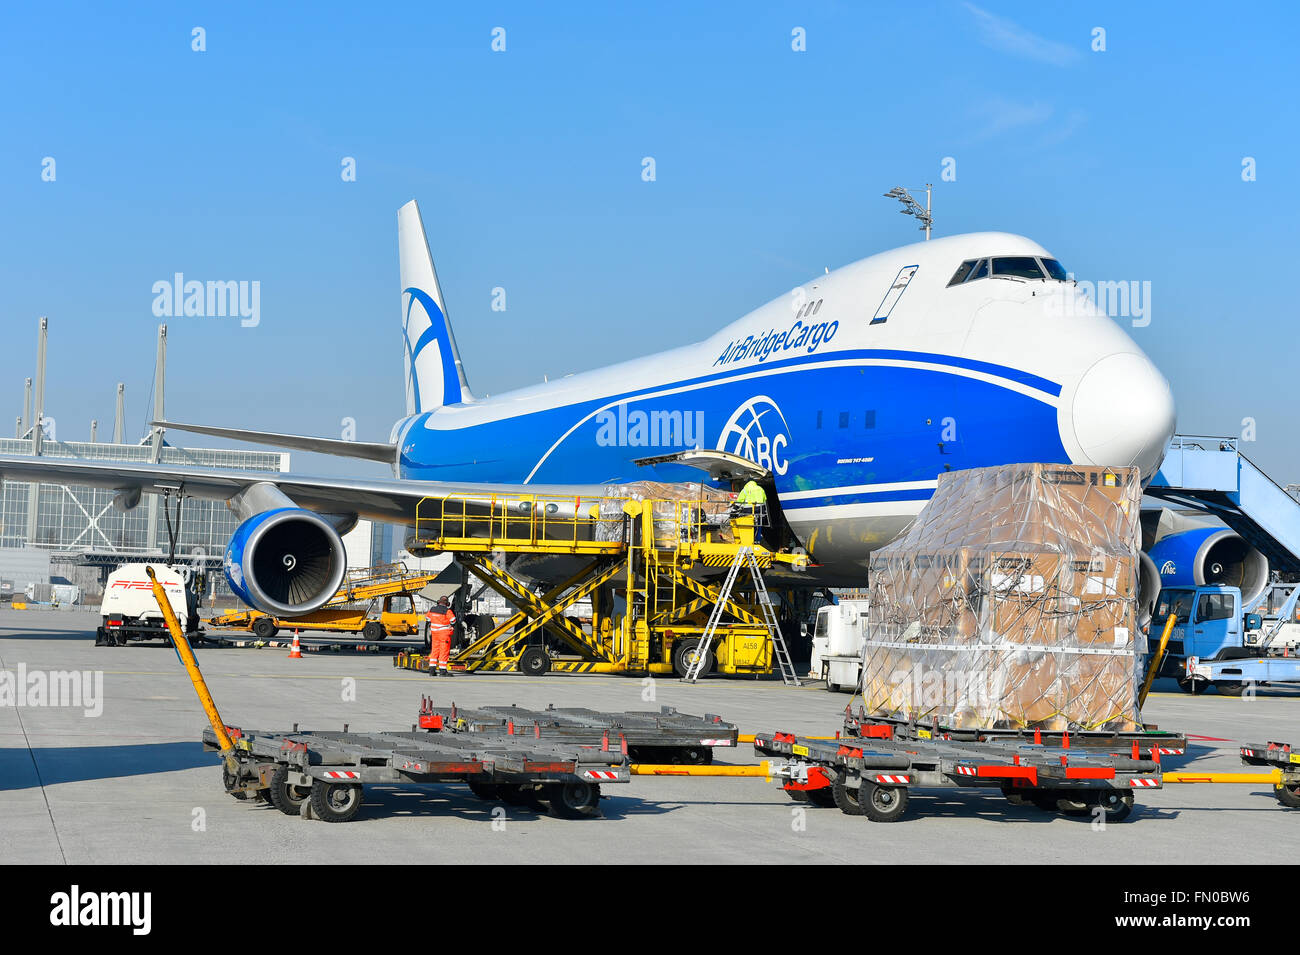 freighter, freight, cargo, airplane, aircraft, plane, Boeing, B 747, B747-400F, ABC, Air Bridge Cargo, freight embarkation, Stock Photo